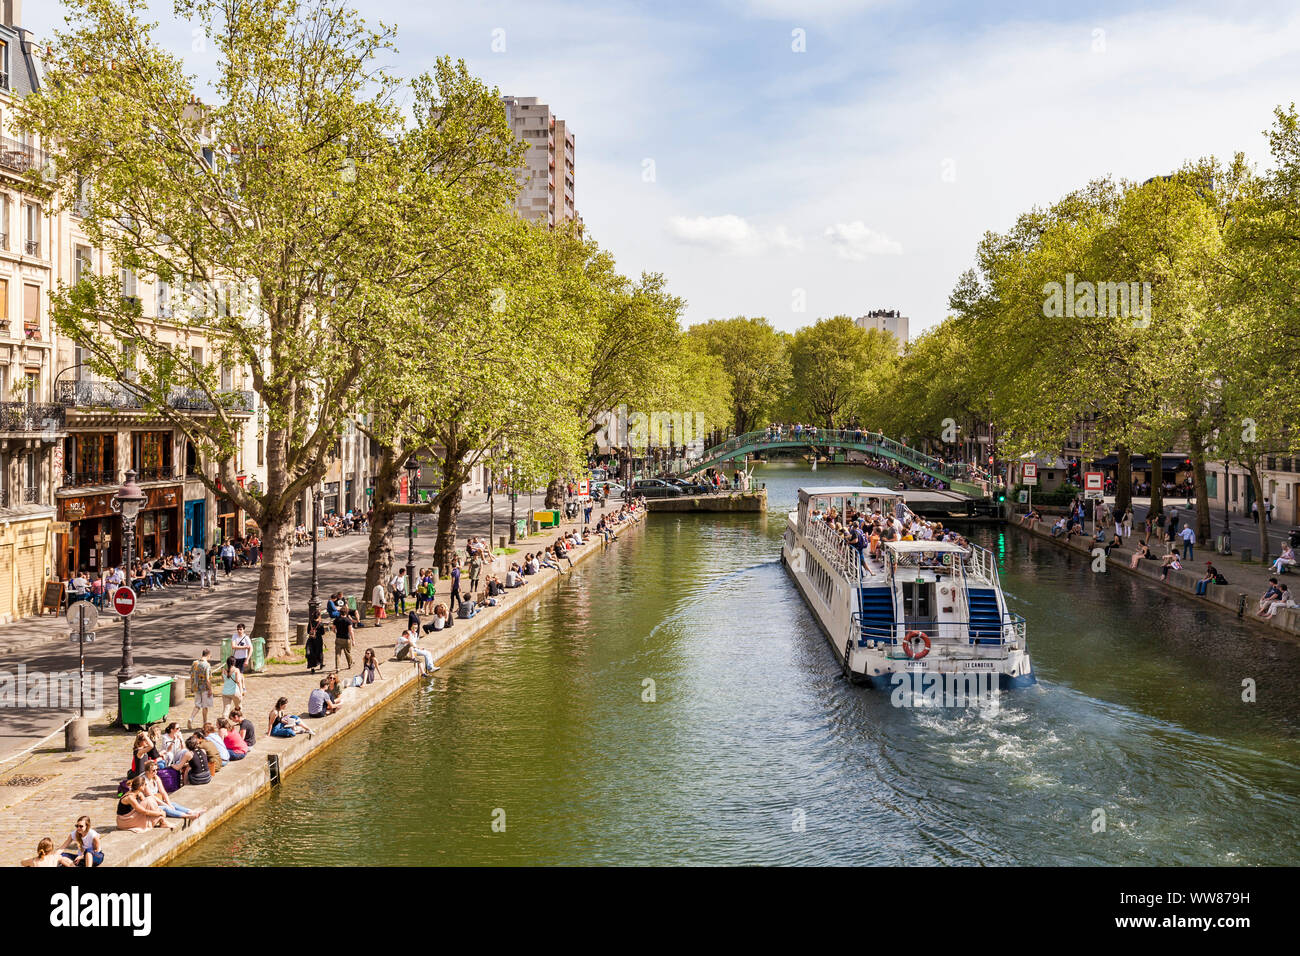 France, Paris, city centre, Canal Saint Martin, shipping channel, excursion boat, sightseeing tour Stock Photo